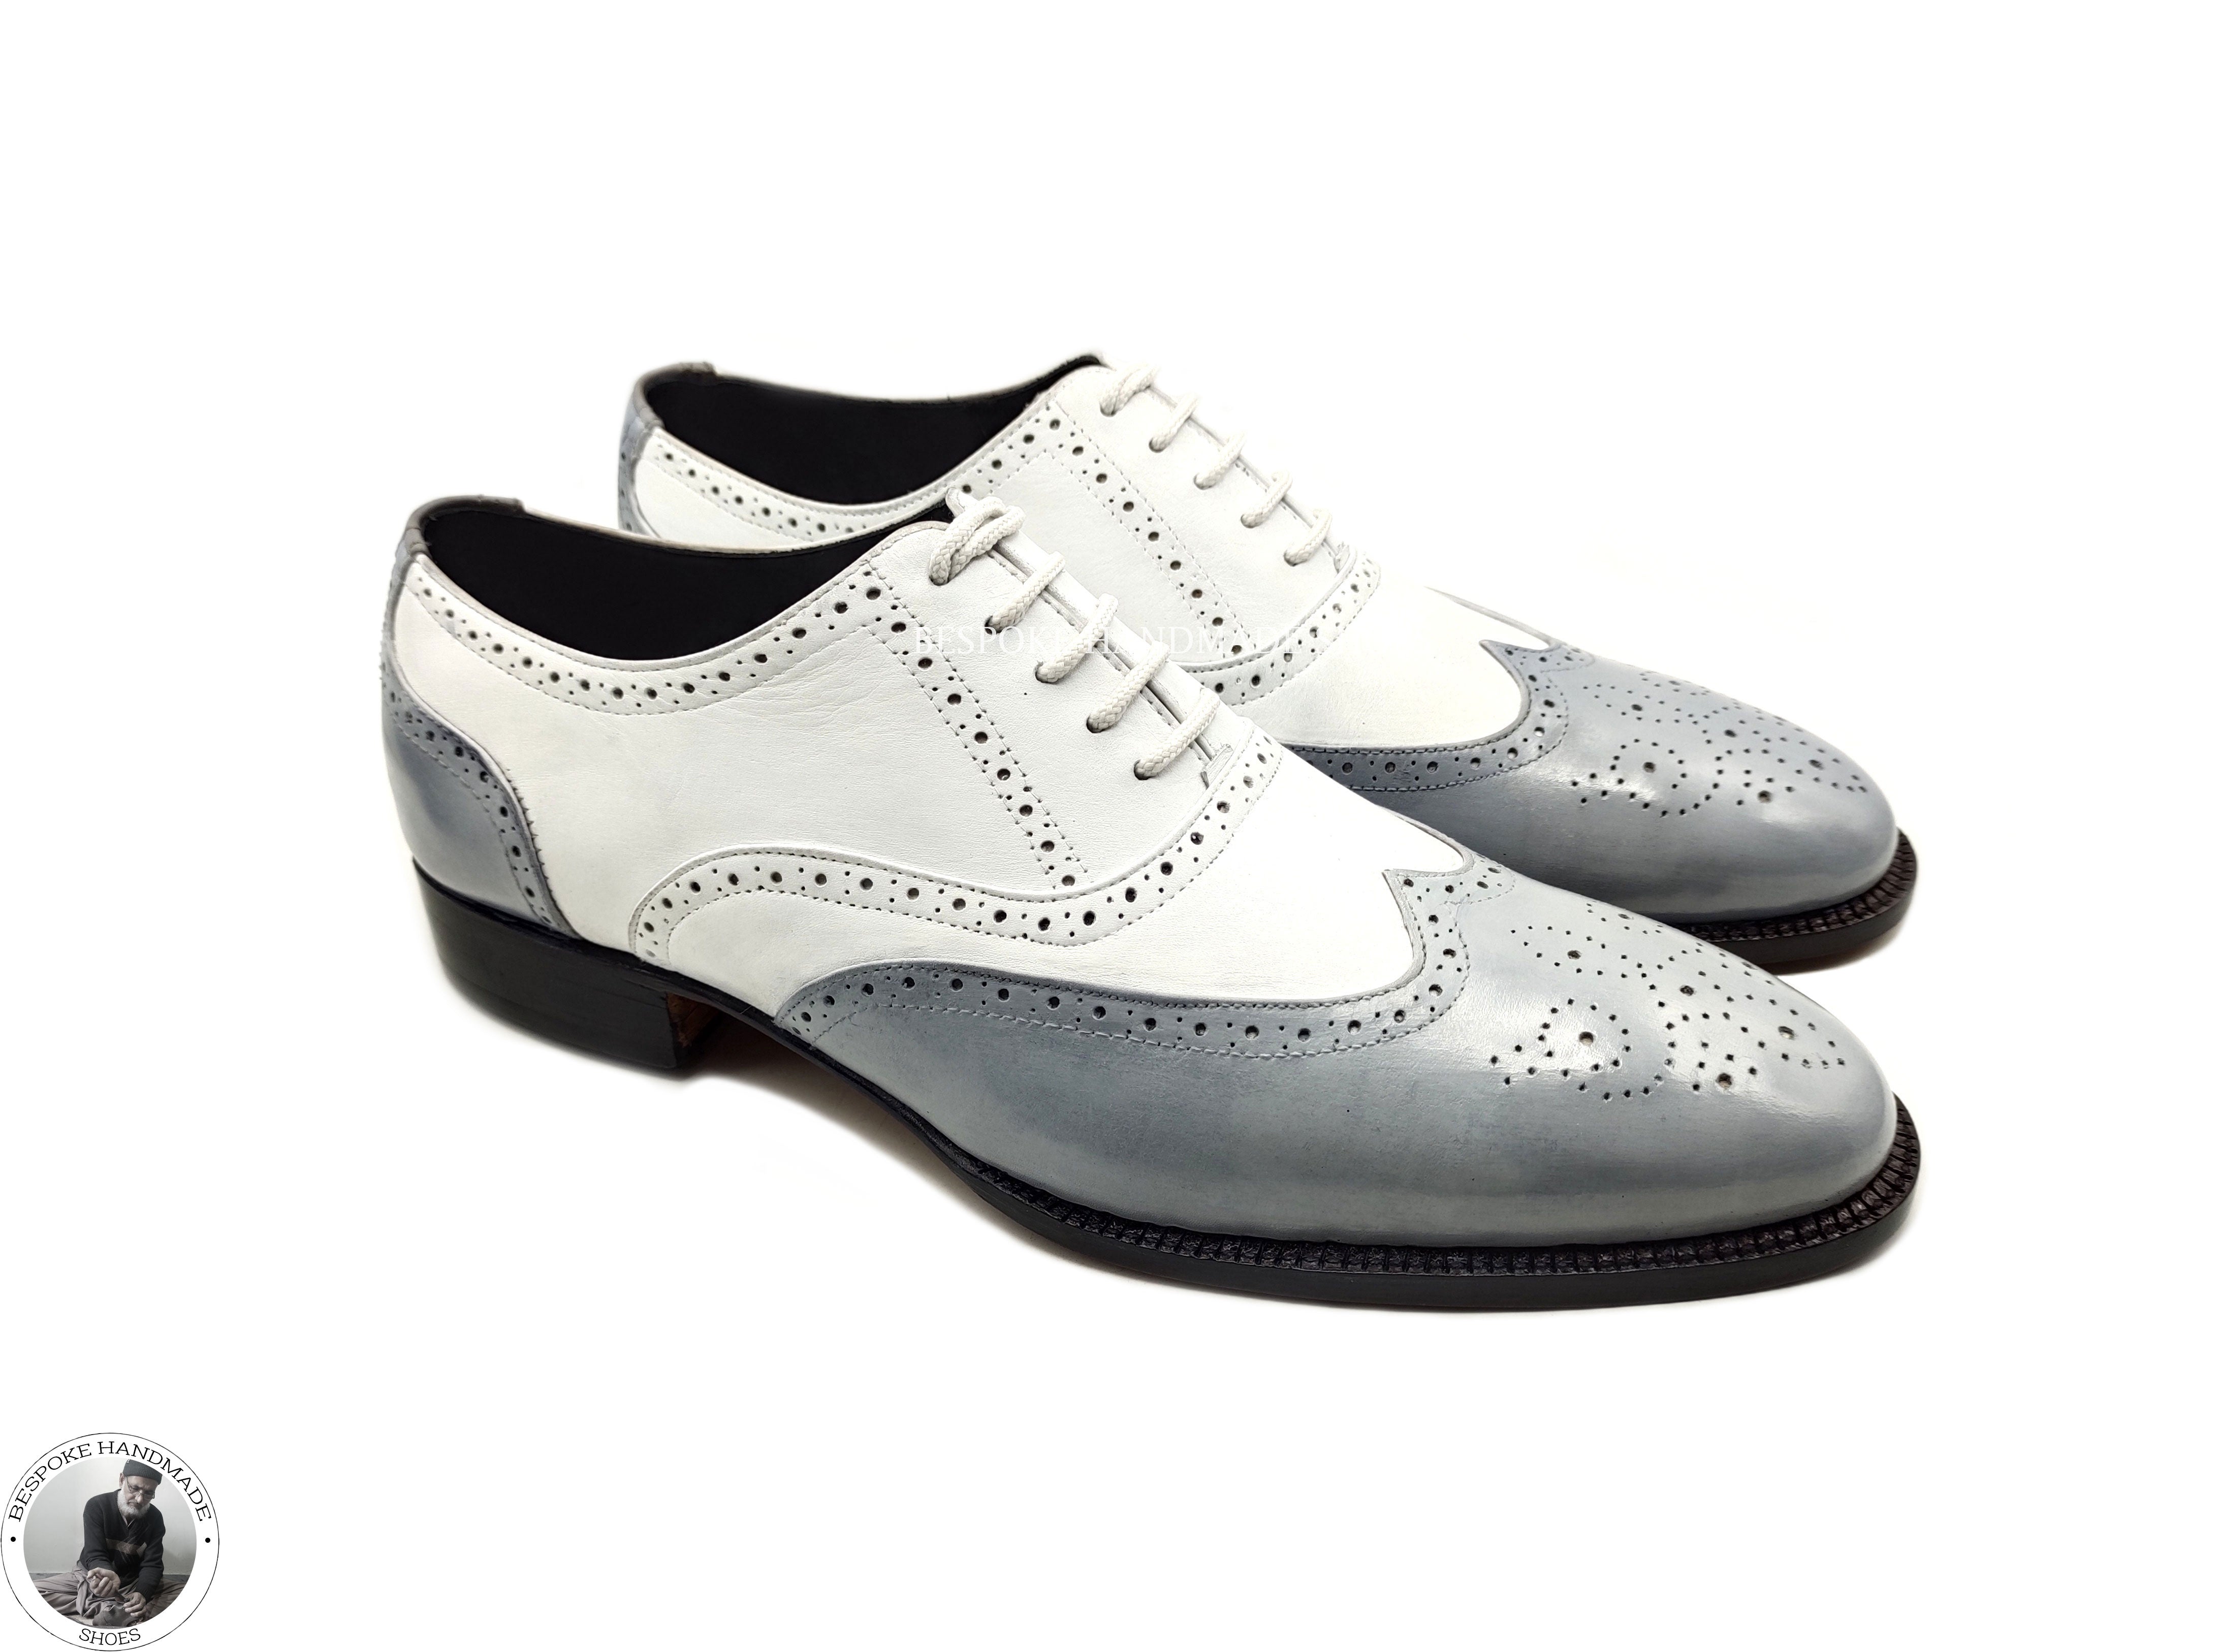 Custom Made, White & Grey Genuine Leather Oxford Brogue Wingtip Casusal Shoes For Men's